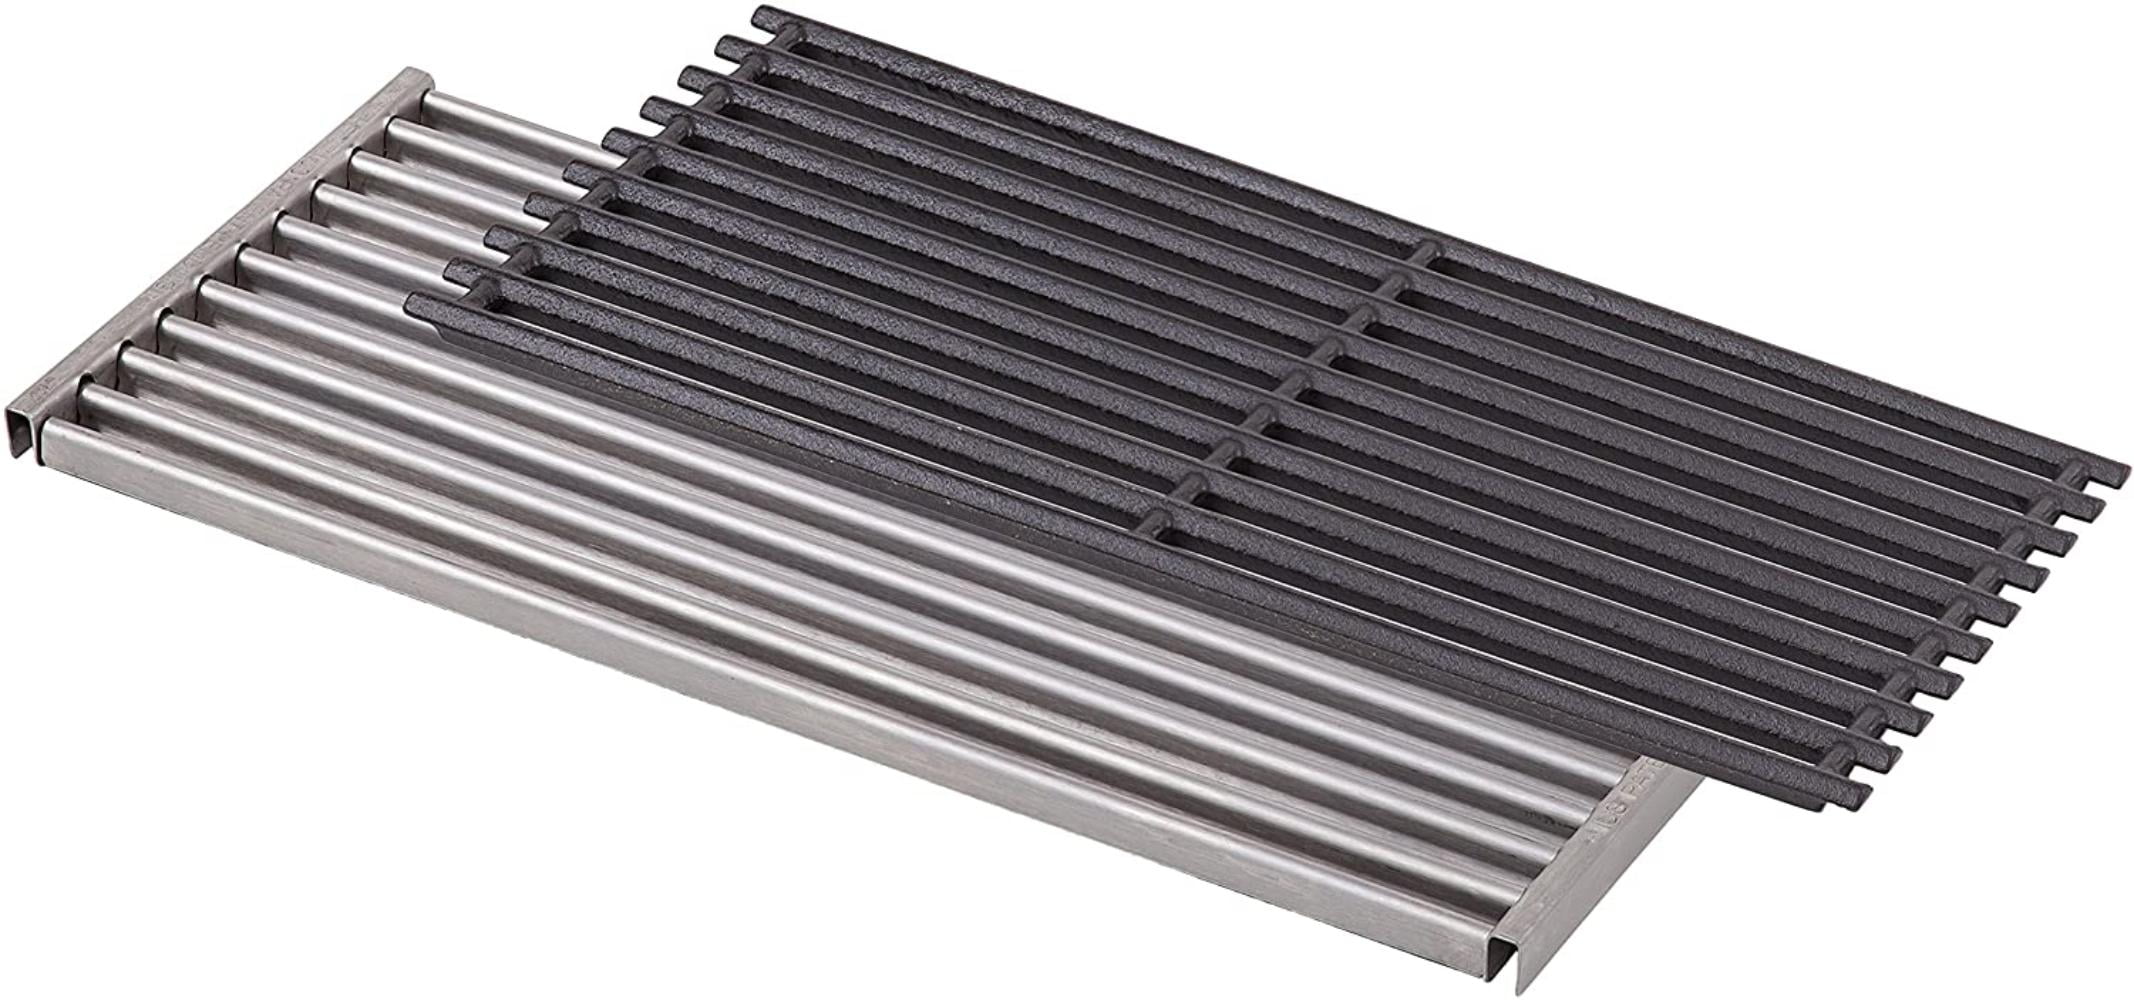 Char-Broil Tru-Infrared Replacement Grate and Emitter for 2 and 3 Burner Grills